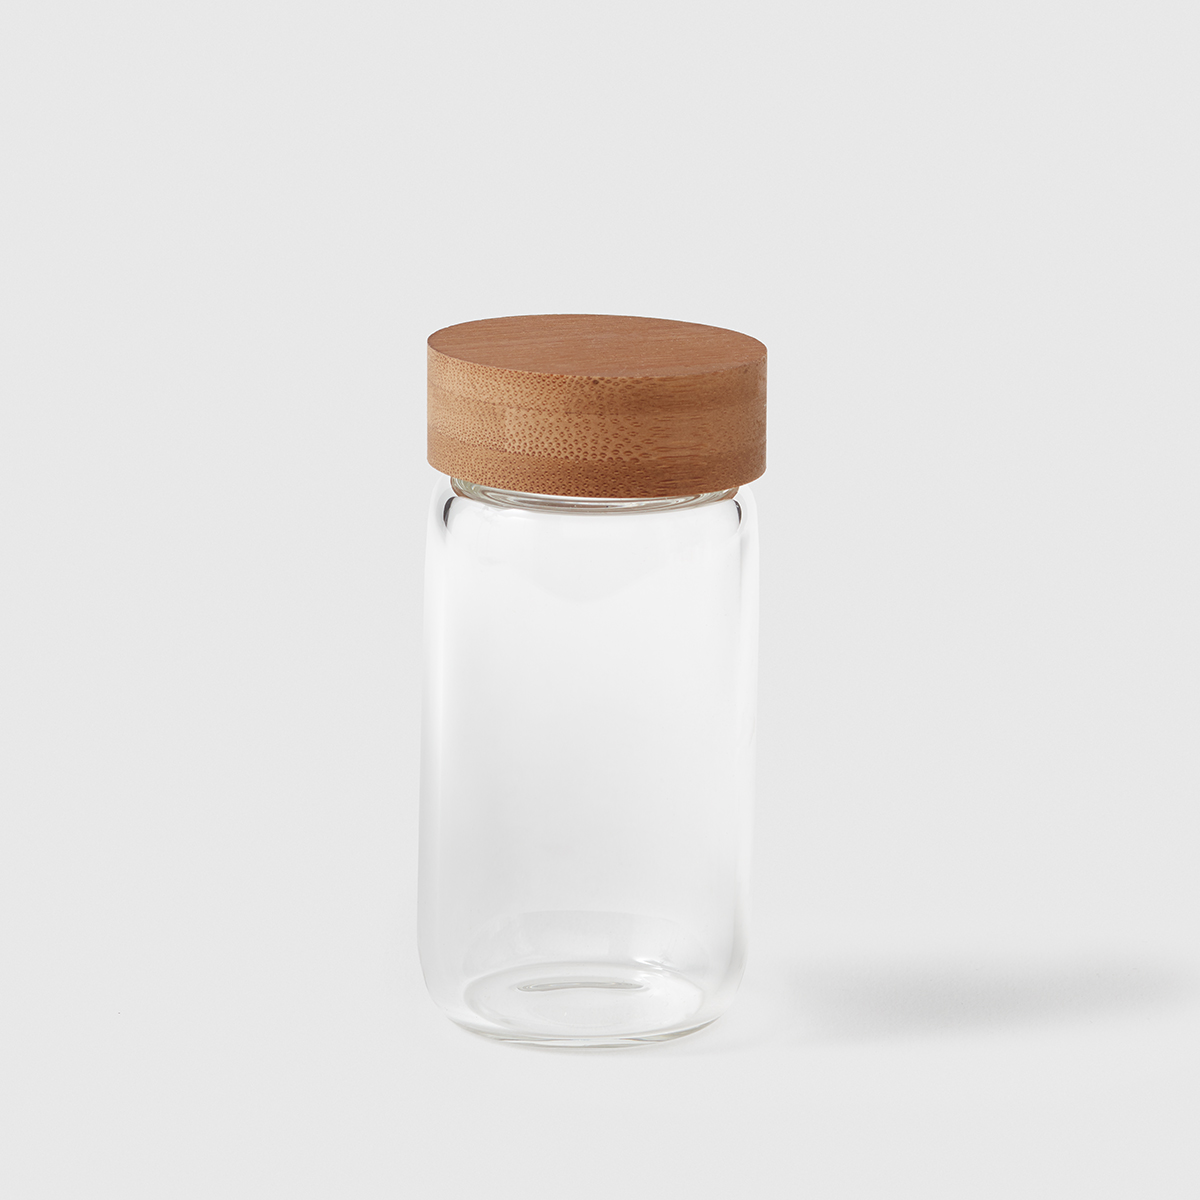 https://www.containerstore.com/catalogimages/404741/10083038-glass-spice-jar.jpg